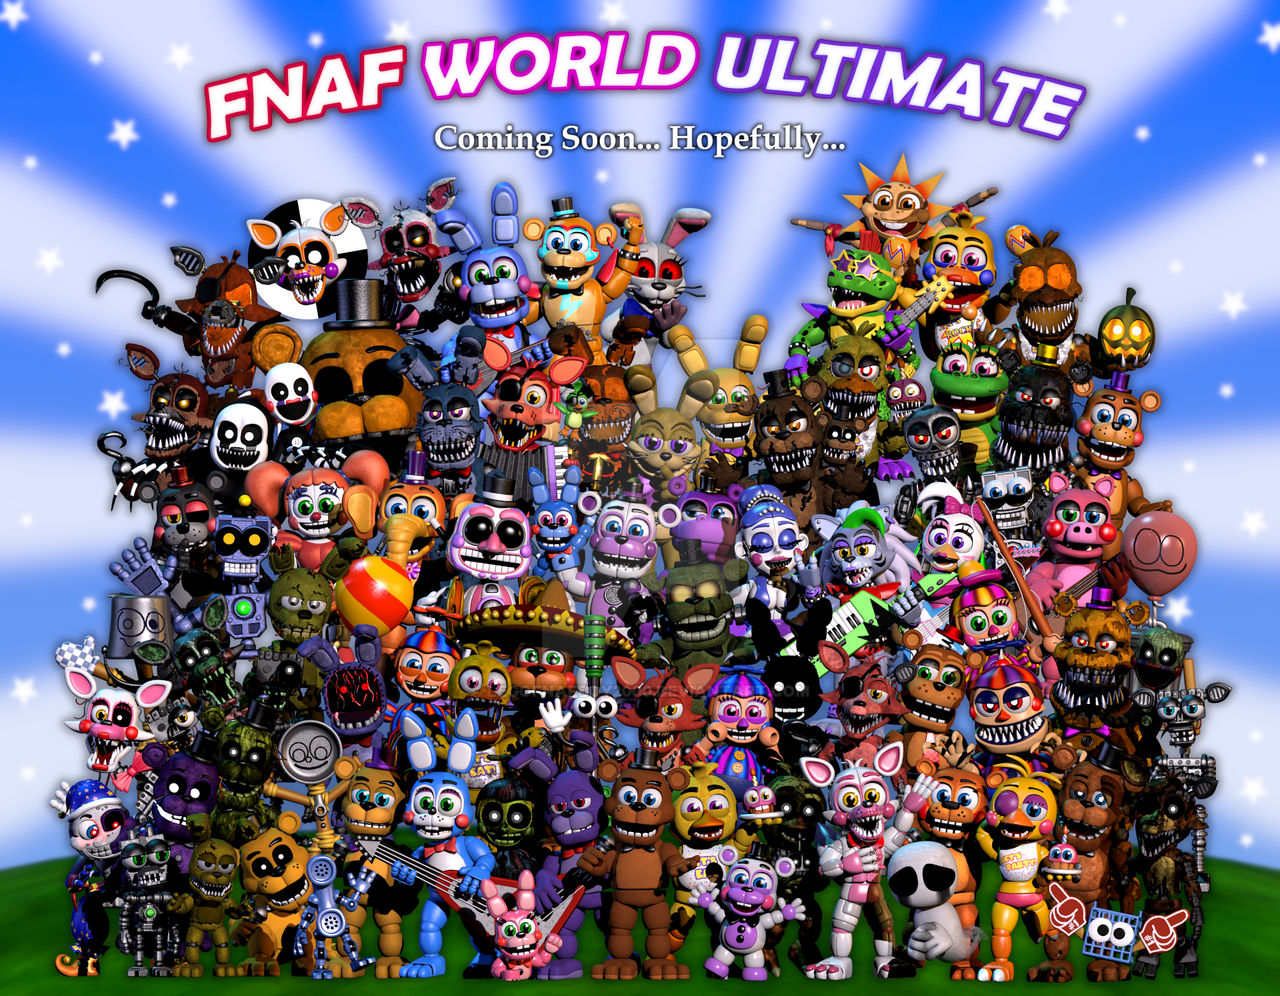 Fnaf World Ultimate NOW ITS ON 3K followers! by beny2000 on DeviantArt